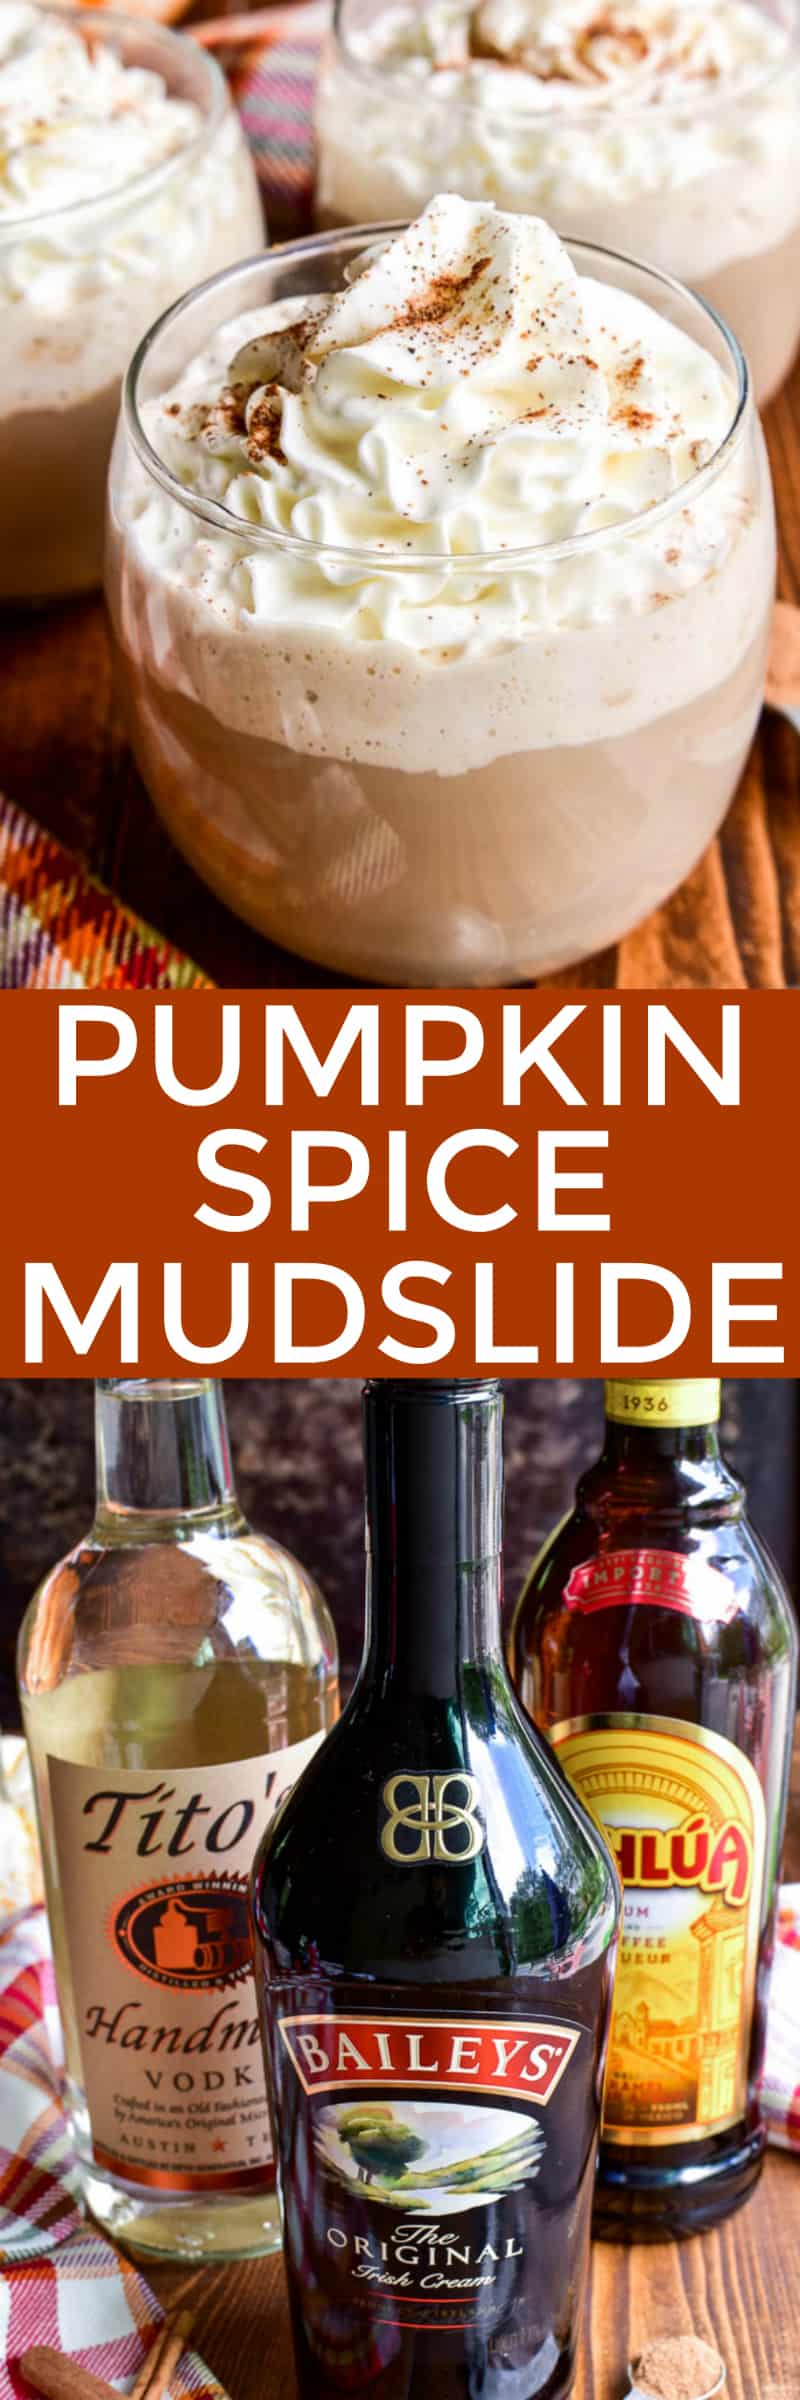 Fall is the time for all things pumpkin spice...and this Pumpkin Spice Mudslide is about to become your new favorite! This drink combines all the flavors of the classic mudslide cocktail with a pumpkin spice twist. Perfect for fall gatherings or cozy nights by the fire, if you love mudslides you'll fall in love with this fall version!